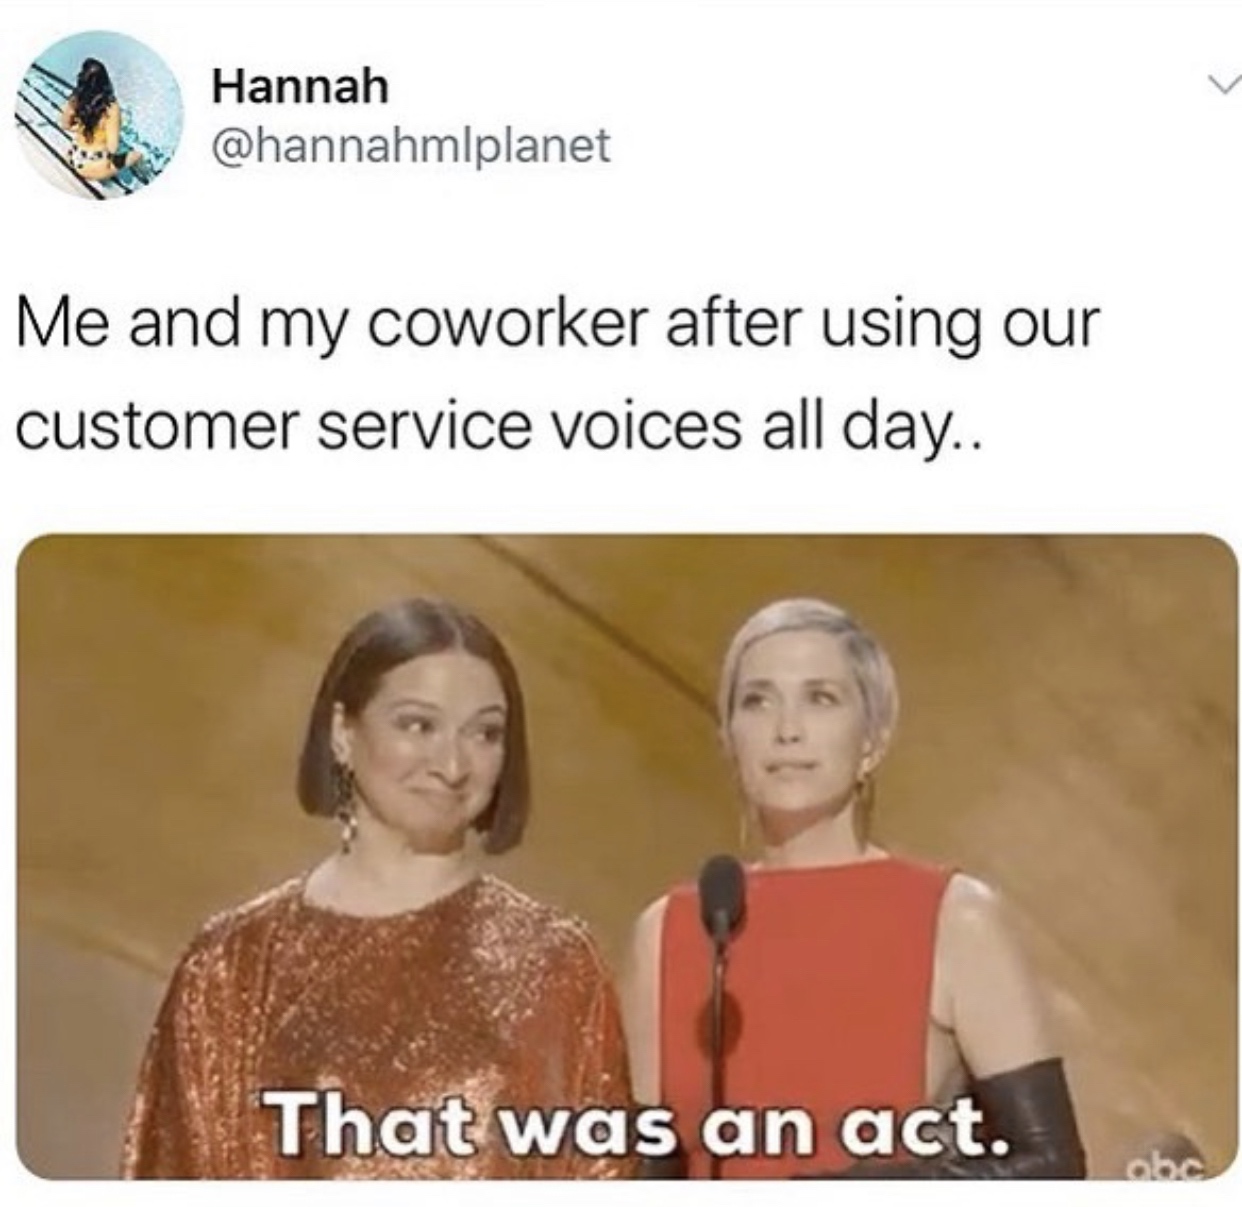 media - Hannah Me and my coworker after using our customer service voices all day.. That was an act.